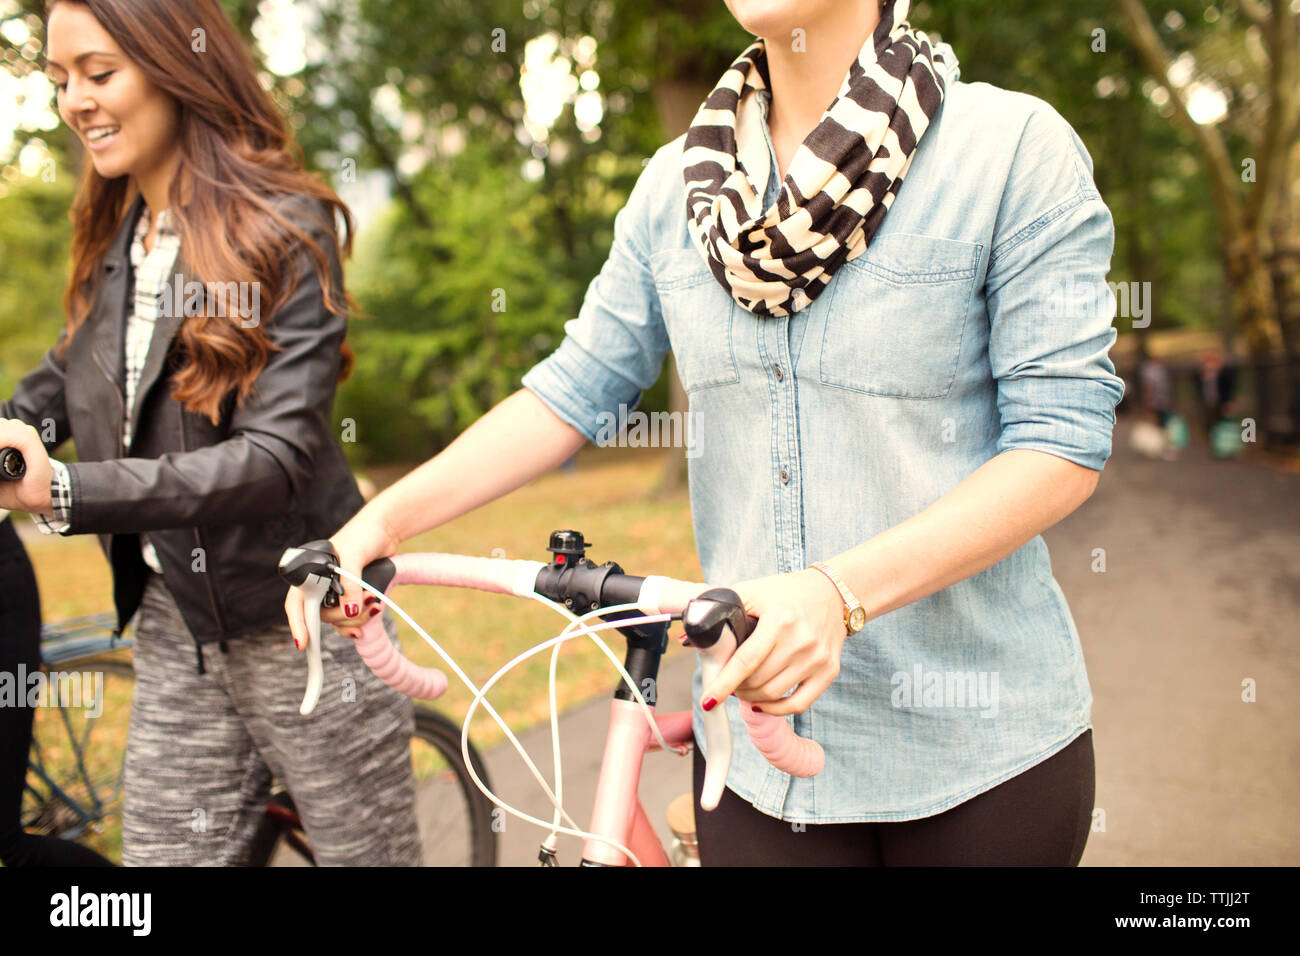 Women with bicycles walking on road Stock Photo